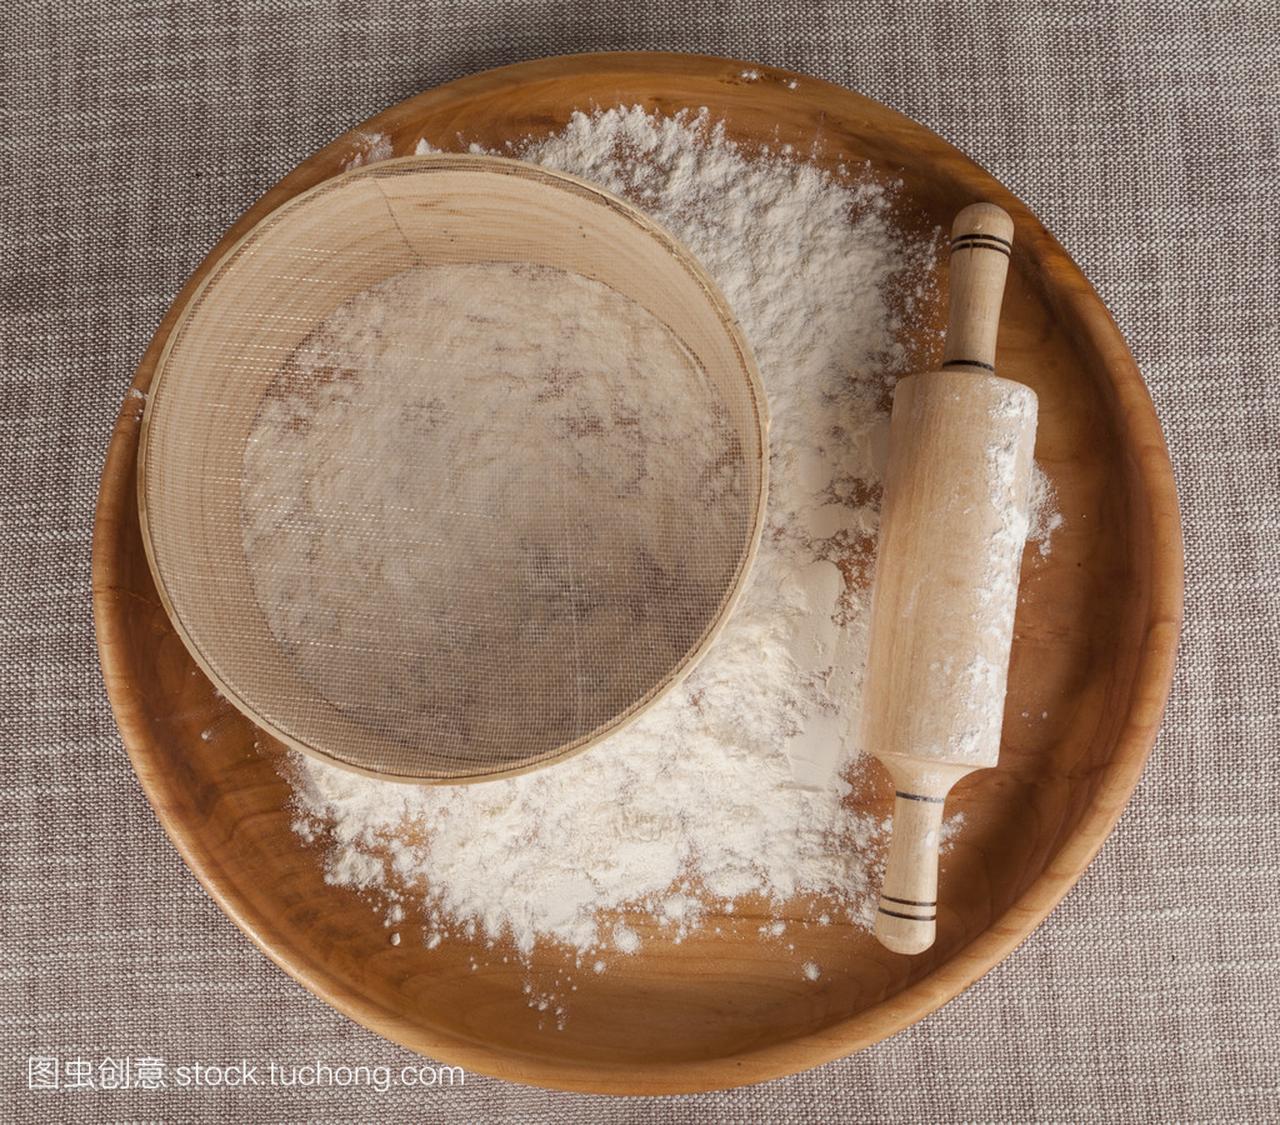 Rolling pin and sieve in the flour on a wooden tray.